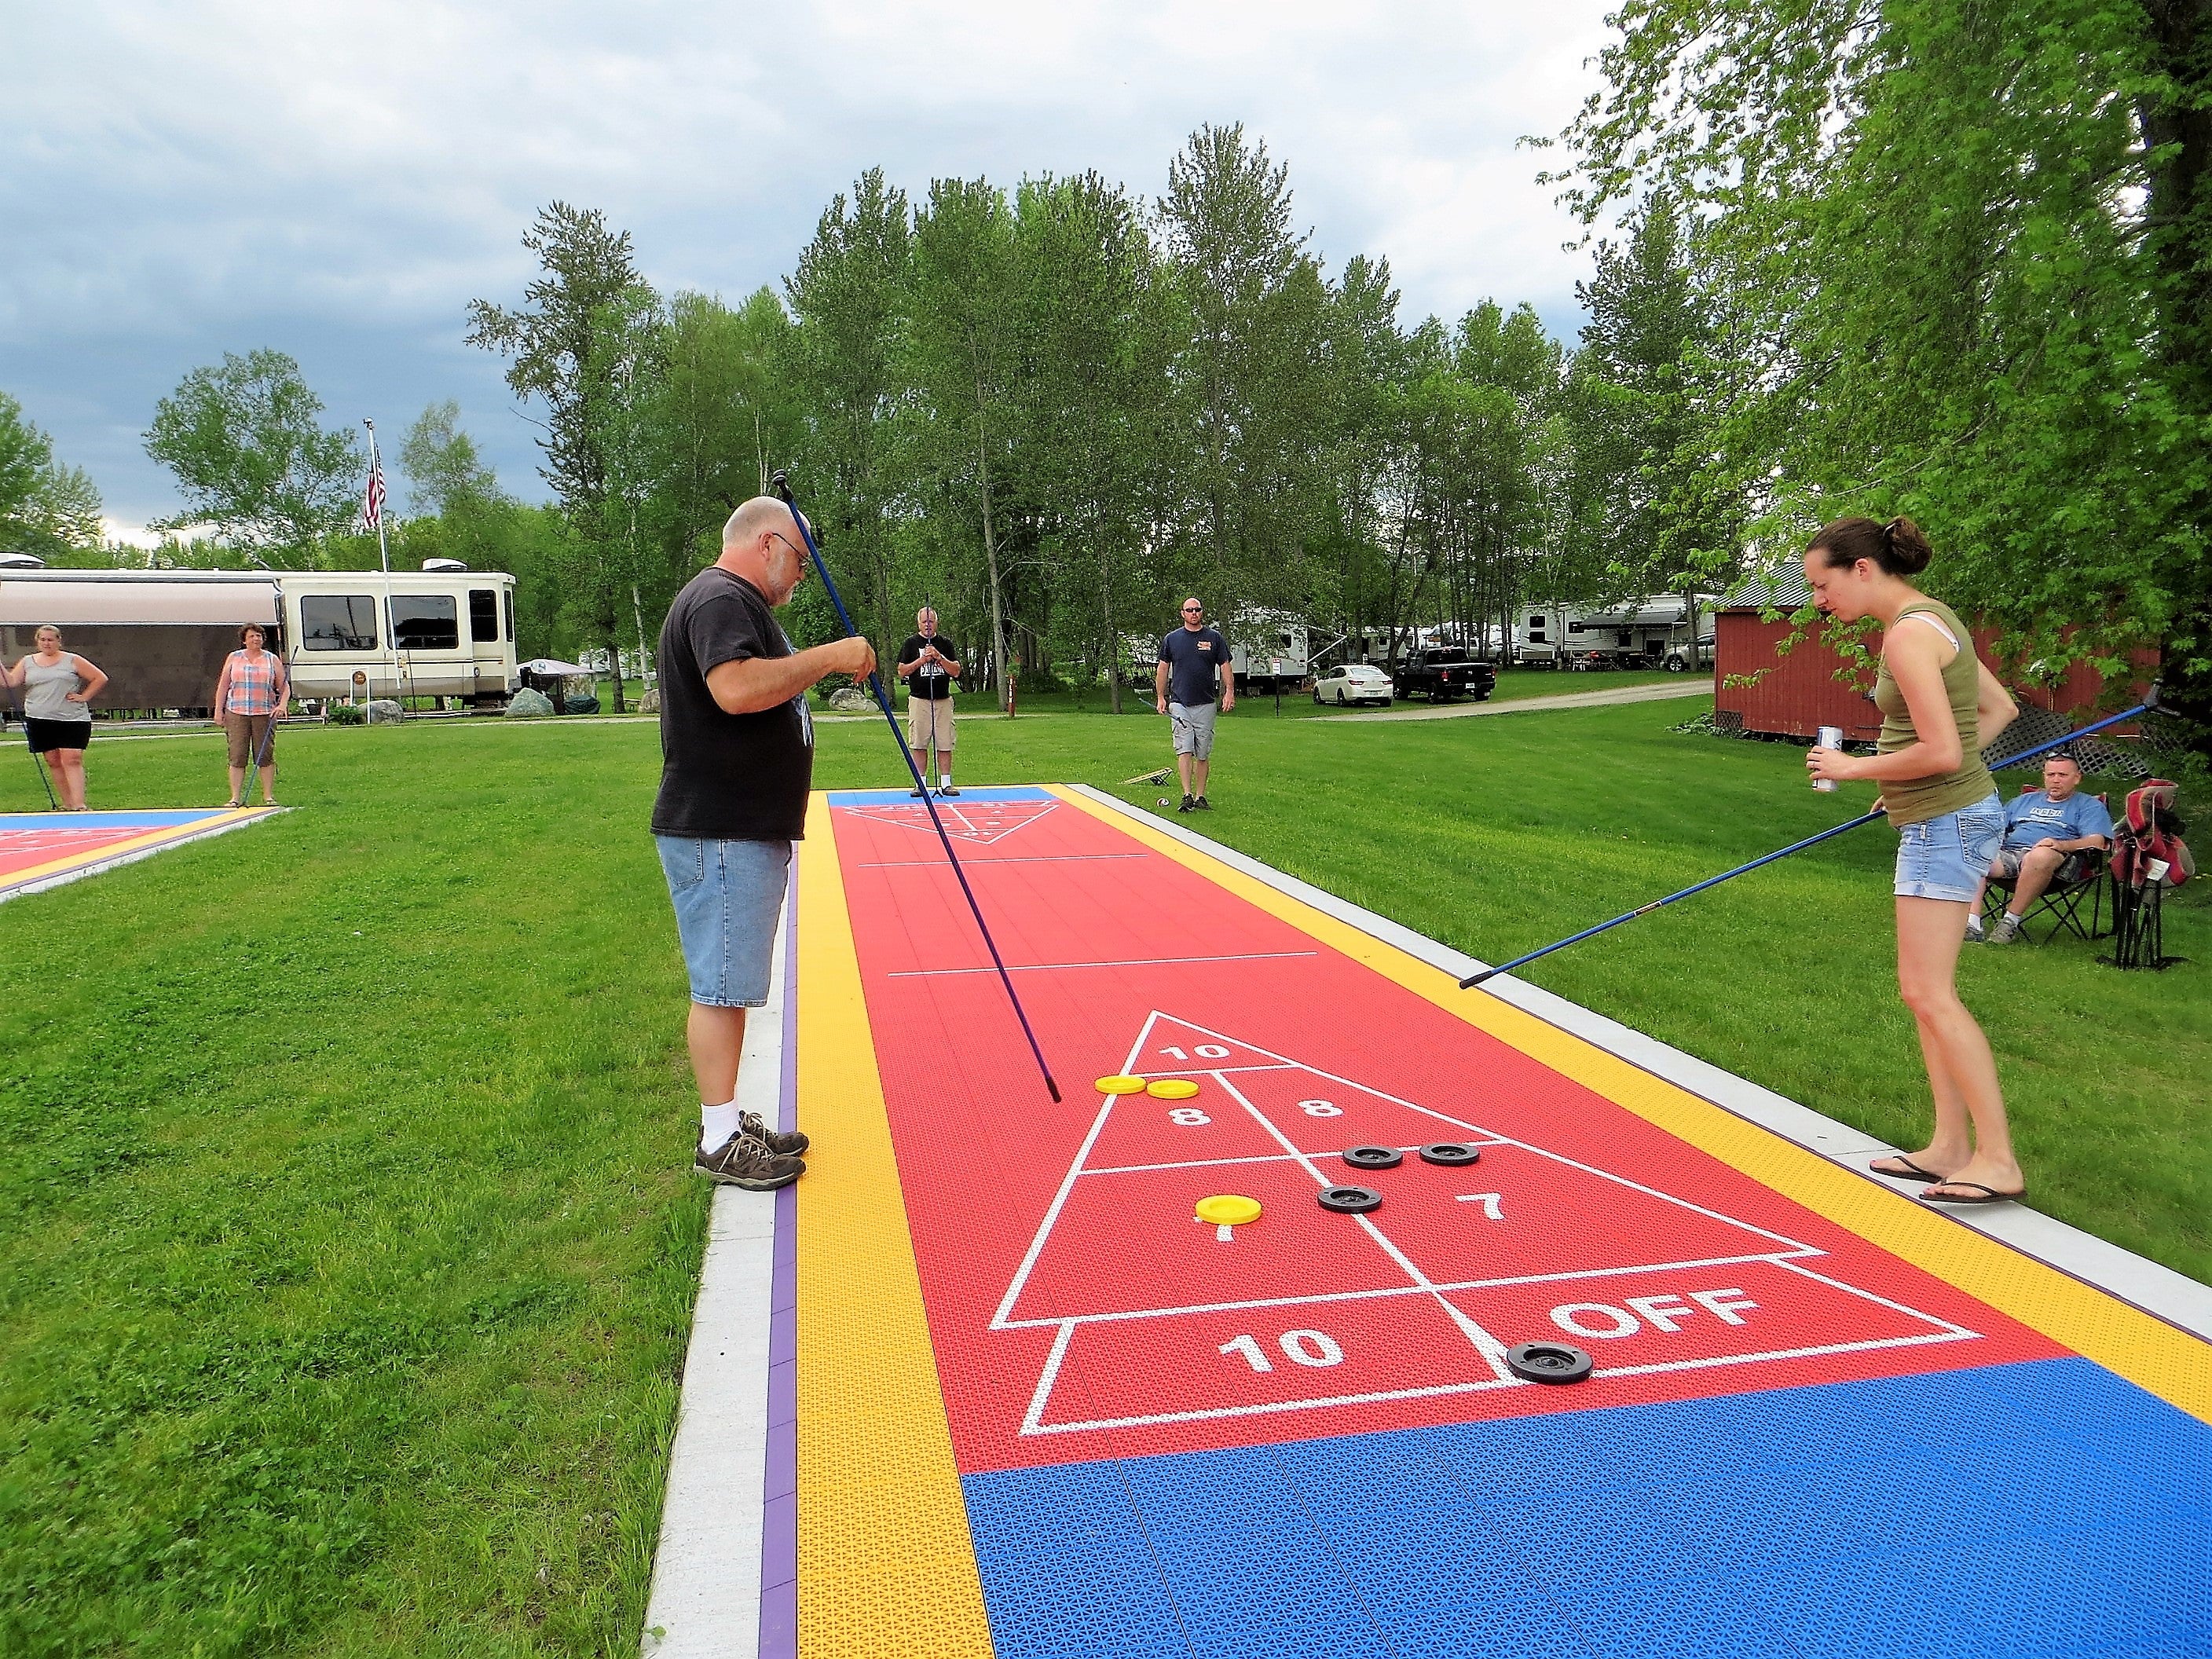 We love our new shuffleboard courts and have tournaments throughout the year with cash prizes!